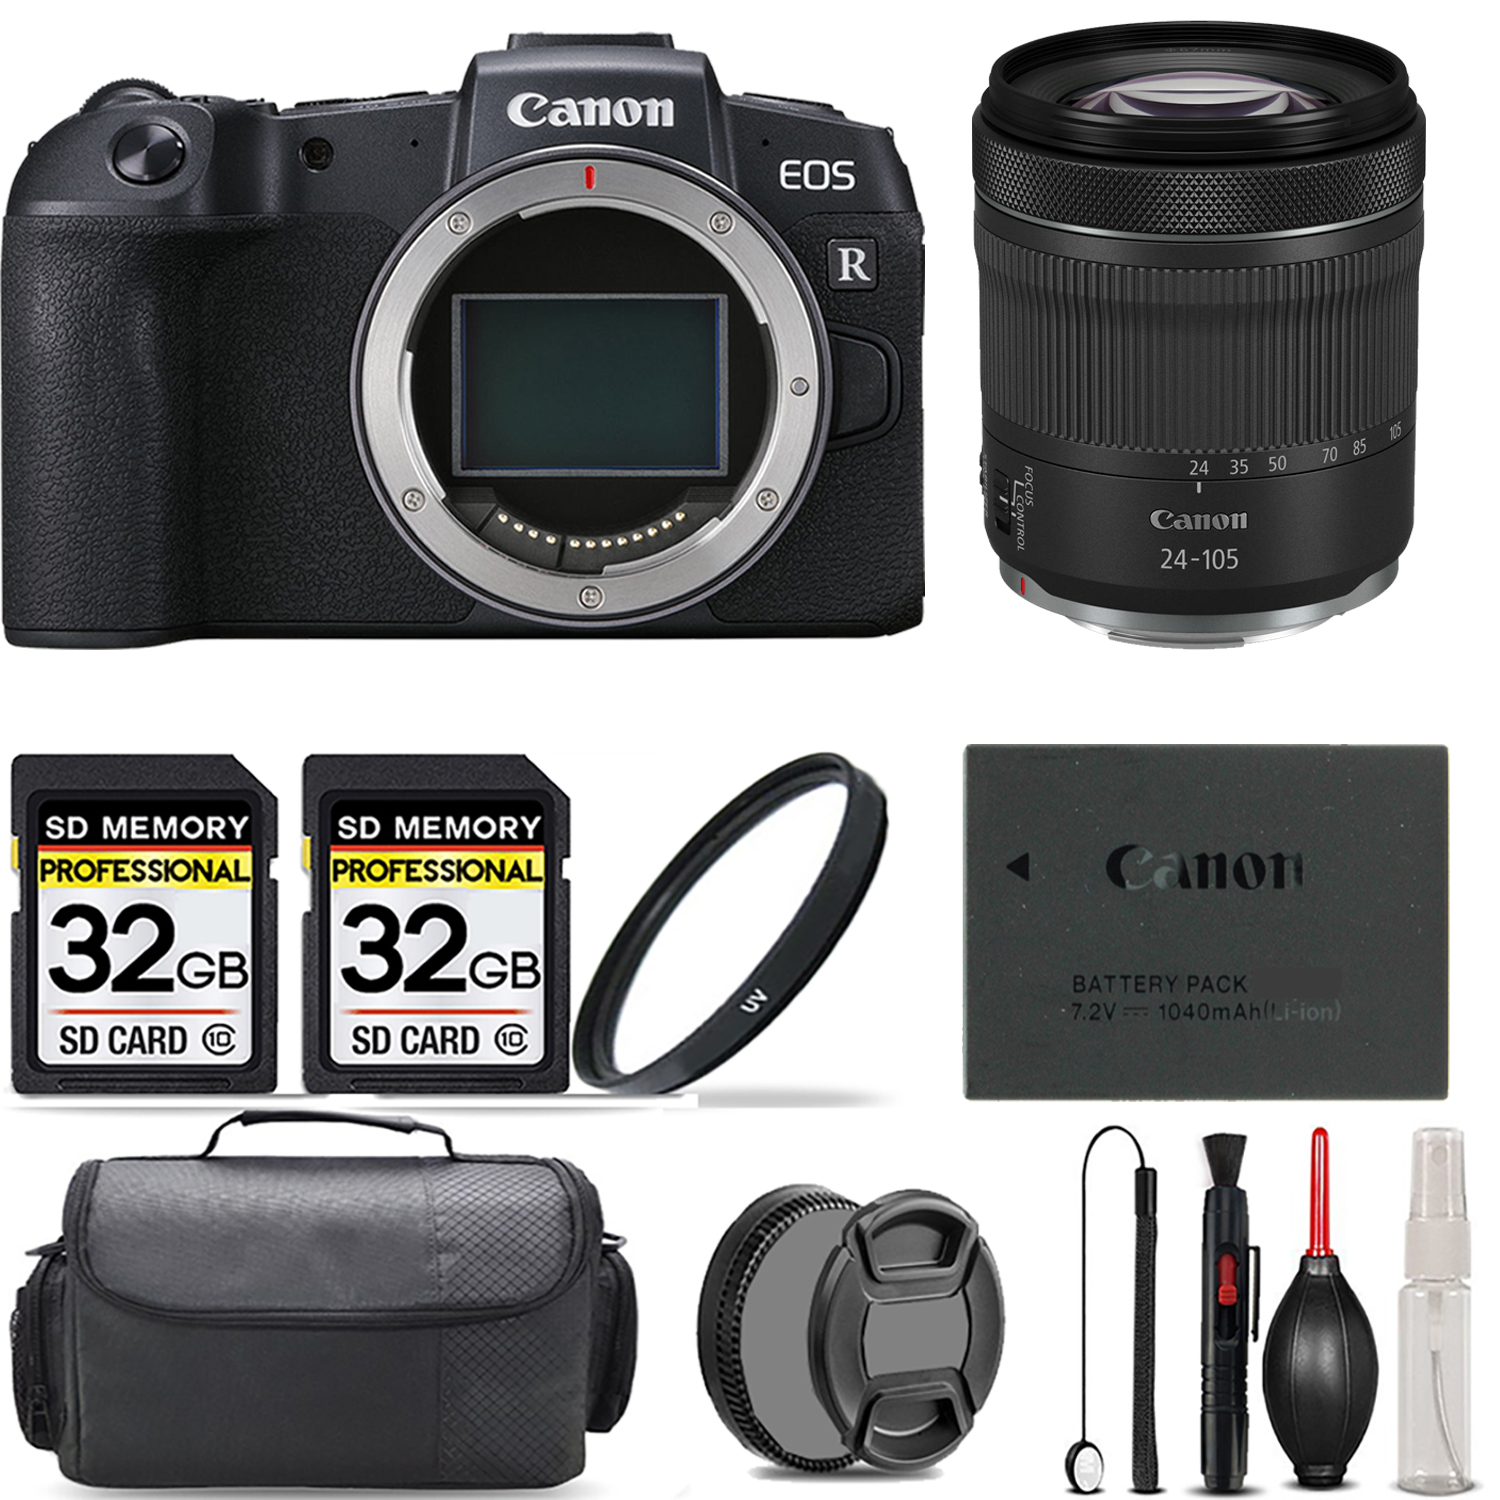 EOS RP Camera + 24-105mm IS STM Lens + UV Filter + 64GB + Bag & More! *FREE SHIPPING*